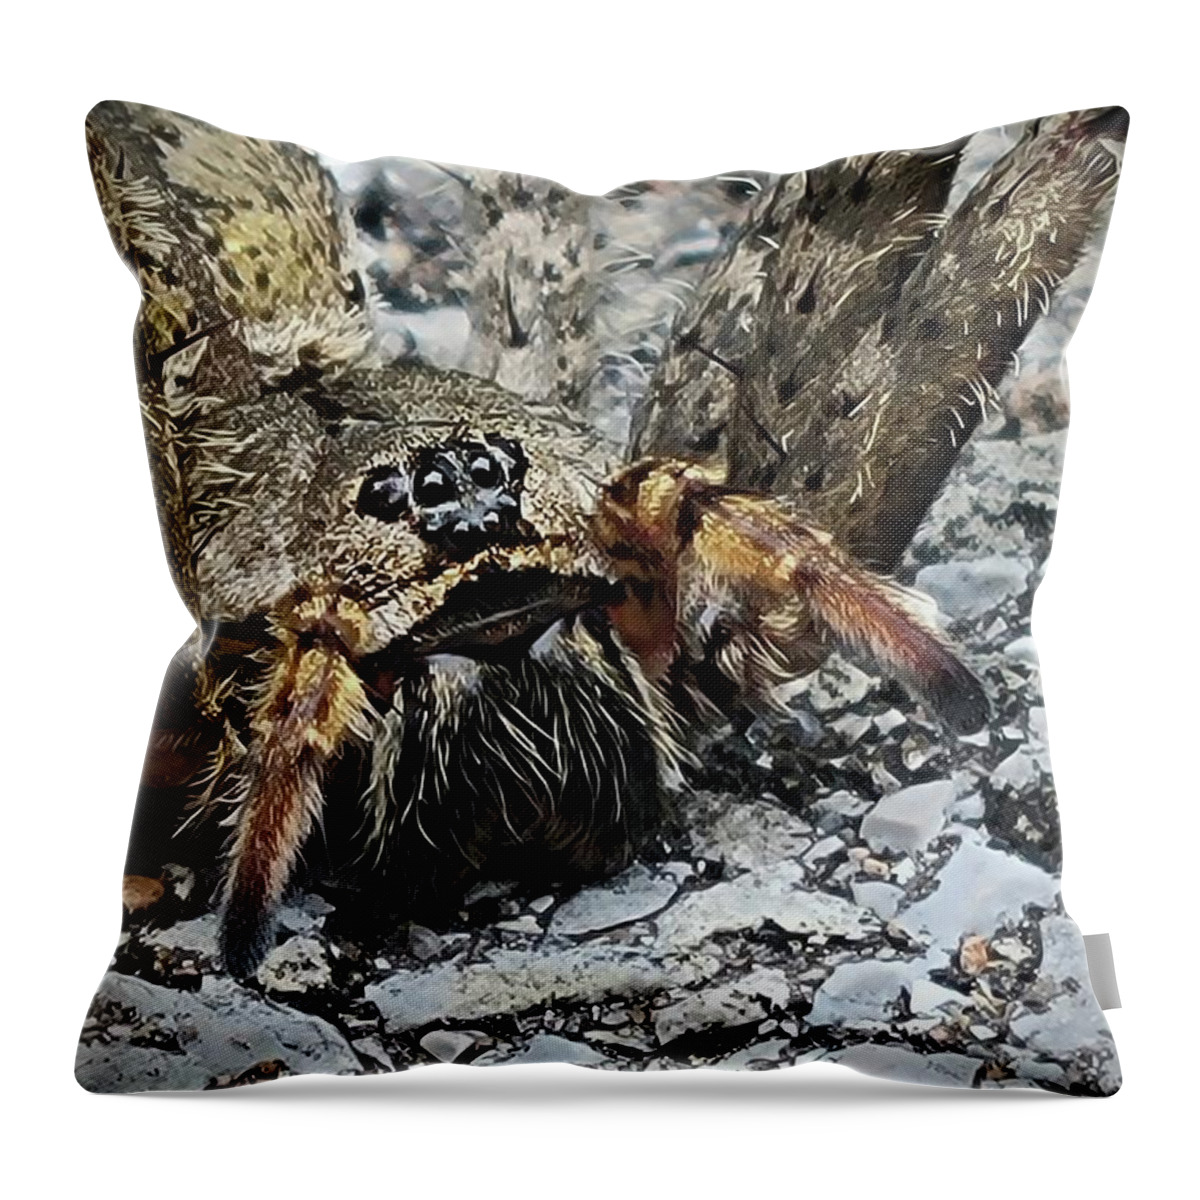 Fishing Spider Throw Pillow featuring the photograph Dolomedes Tenebrosus by Ally White